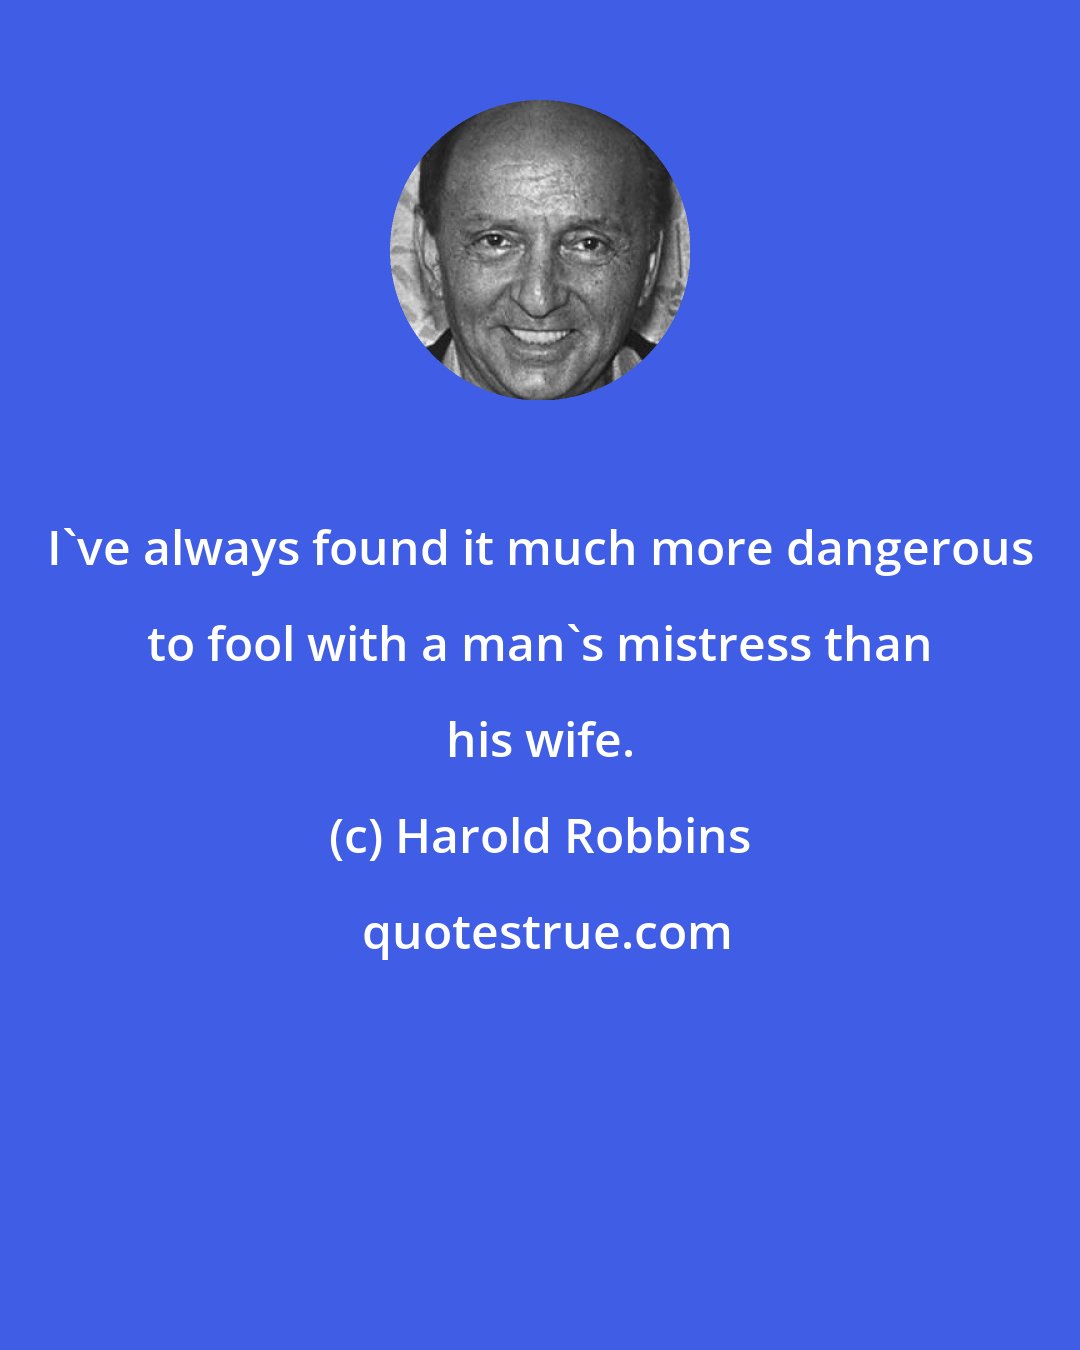 Harold Robbins: I've always found it much more dangerous to fool with a man's mistress than his wife.